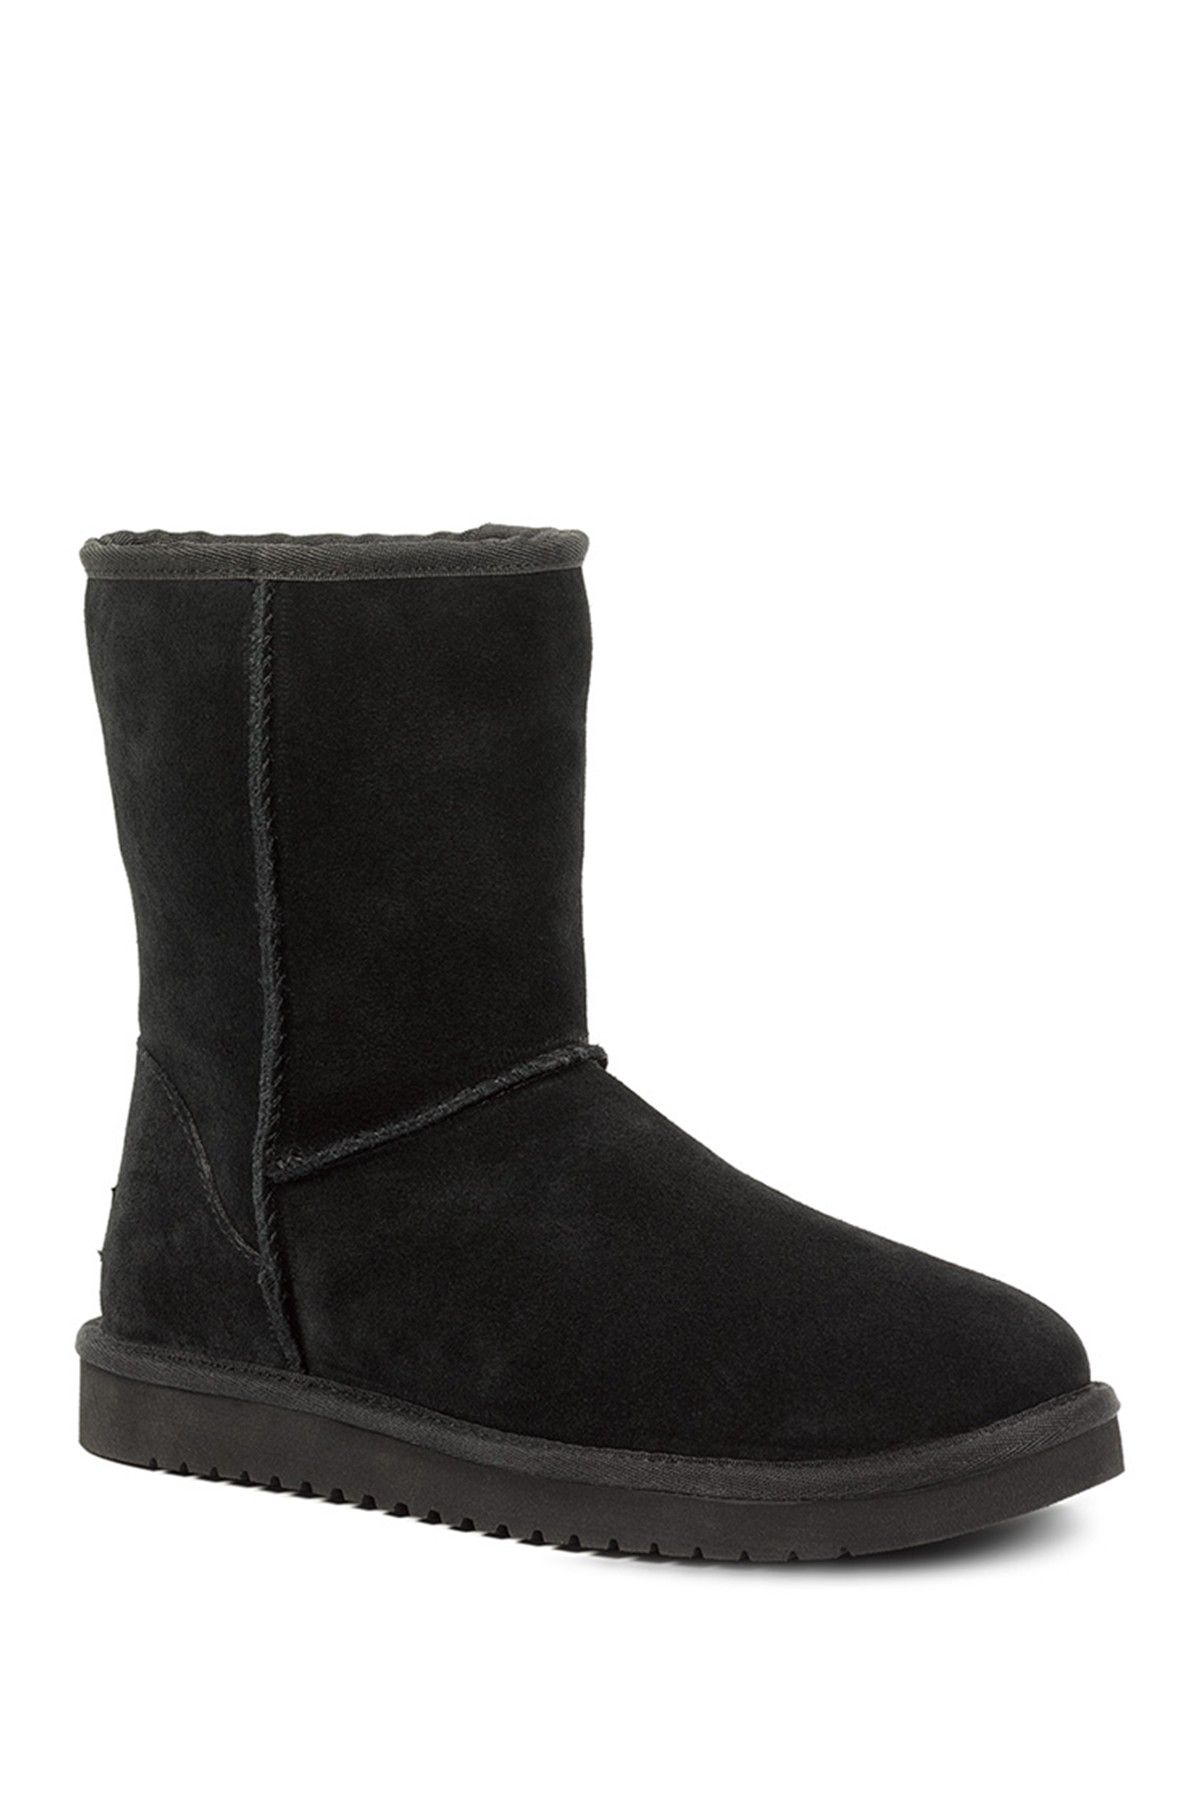 fuzzy boots for men